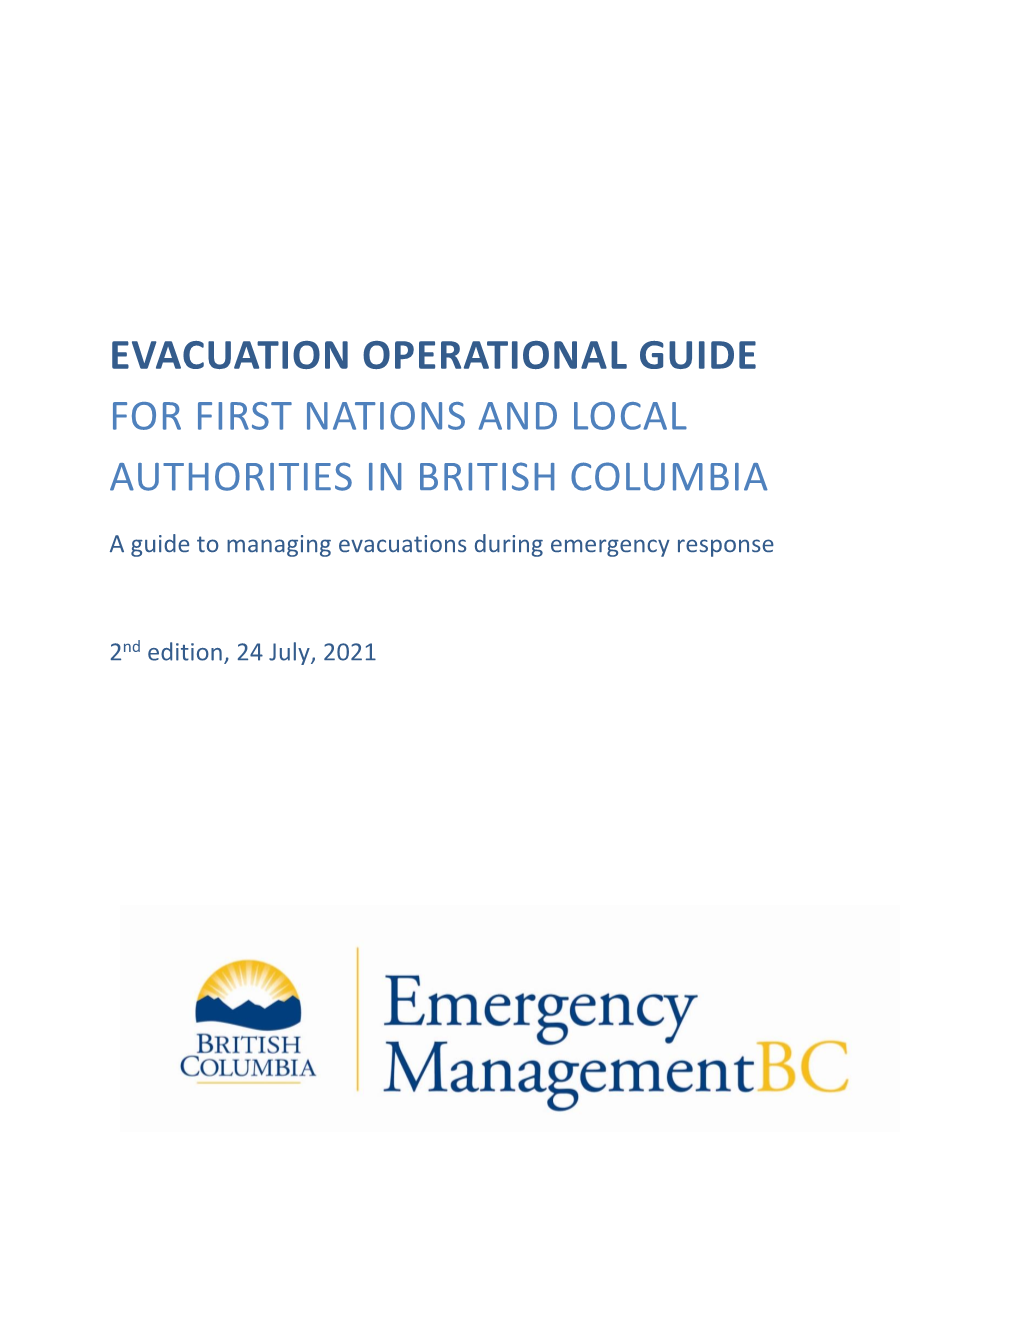 Evacuation Operational Guide for First Nations and Local Authorities In